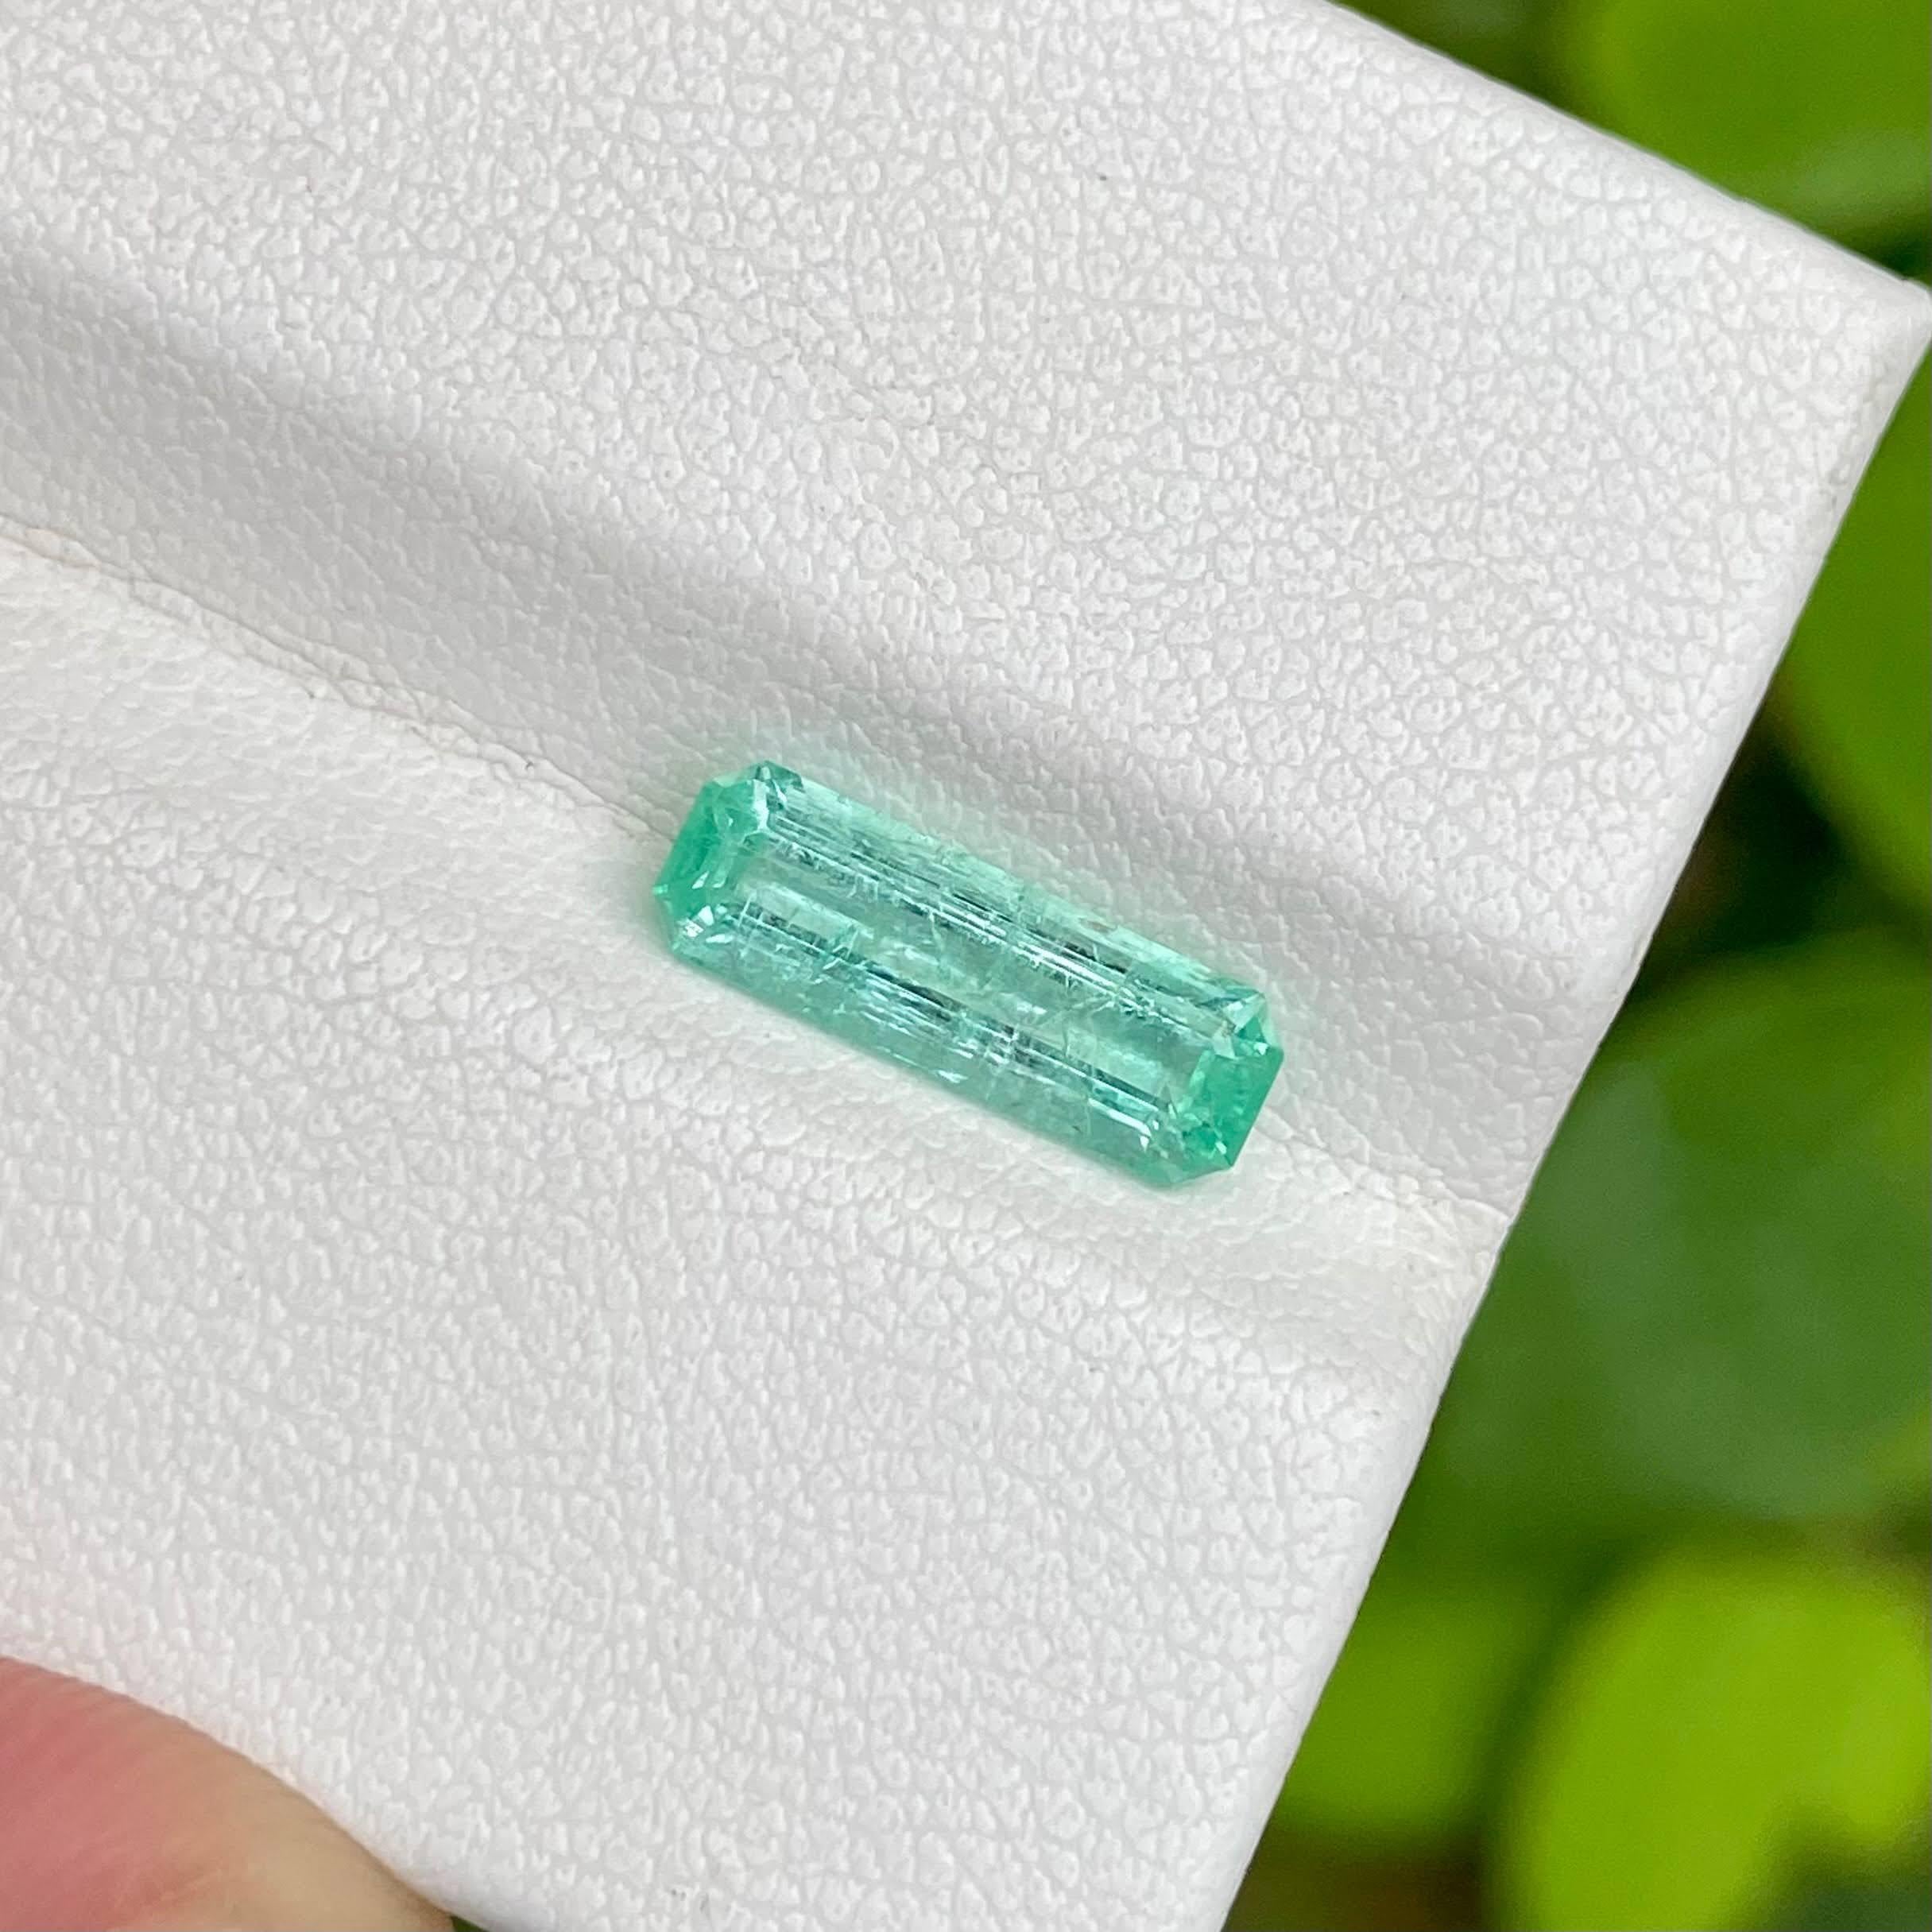 Modern 1.70 Carats Emerald Stone Emerald Cut Natural Gemstone From Afghanistan For Sale